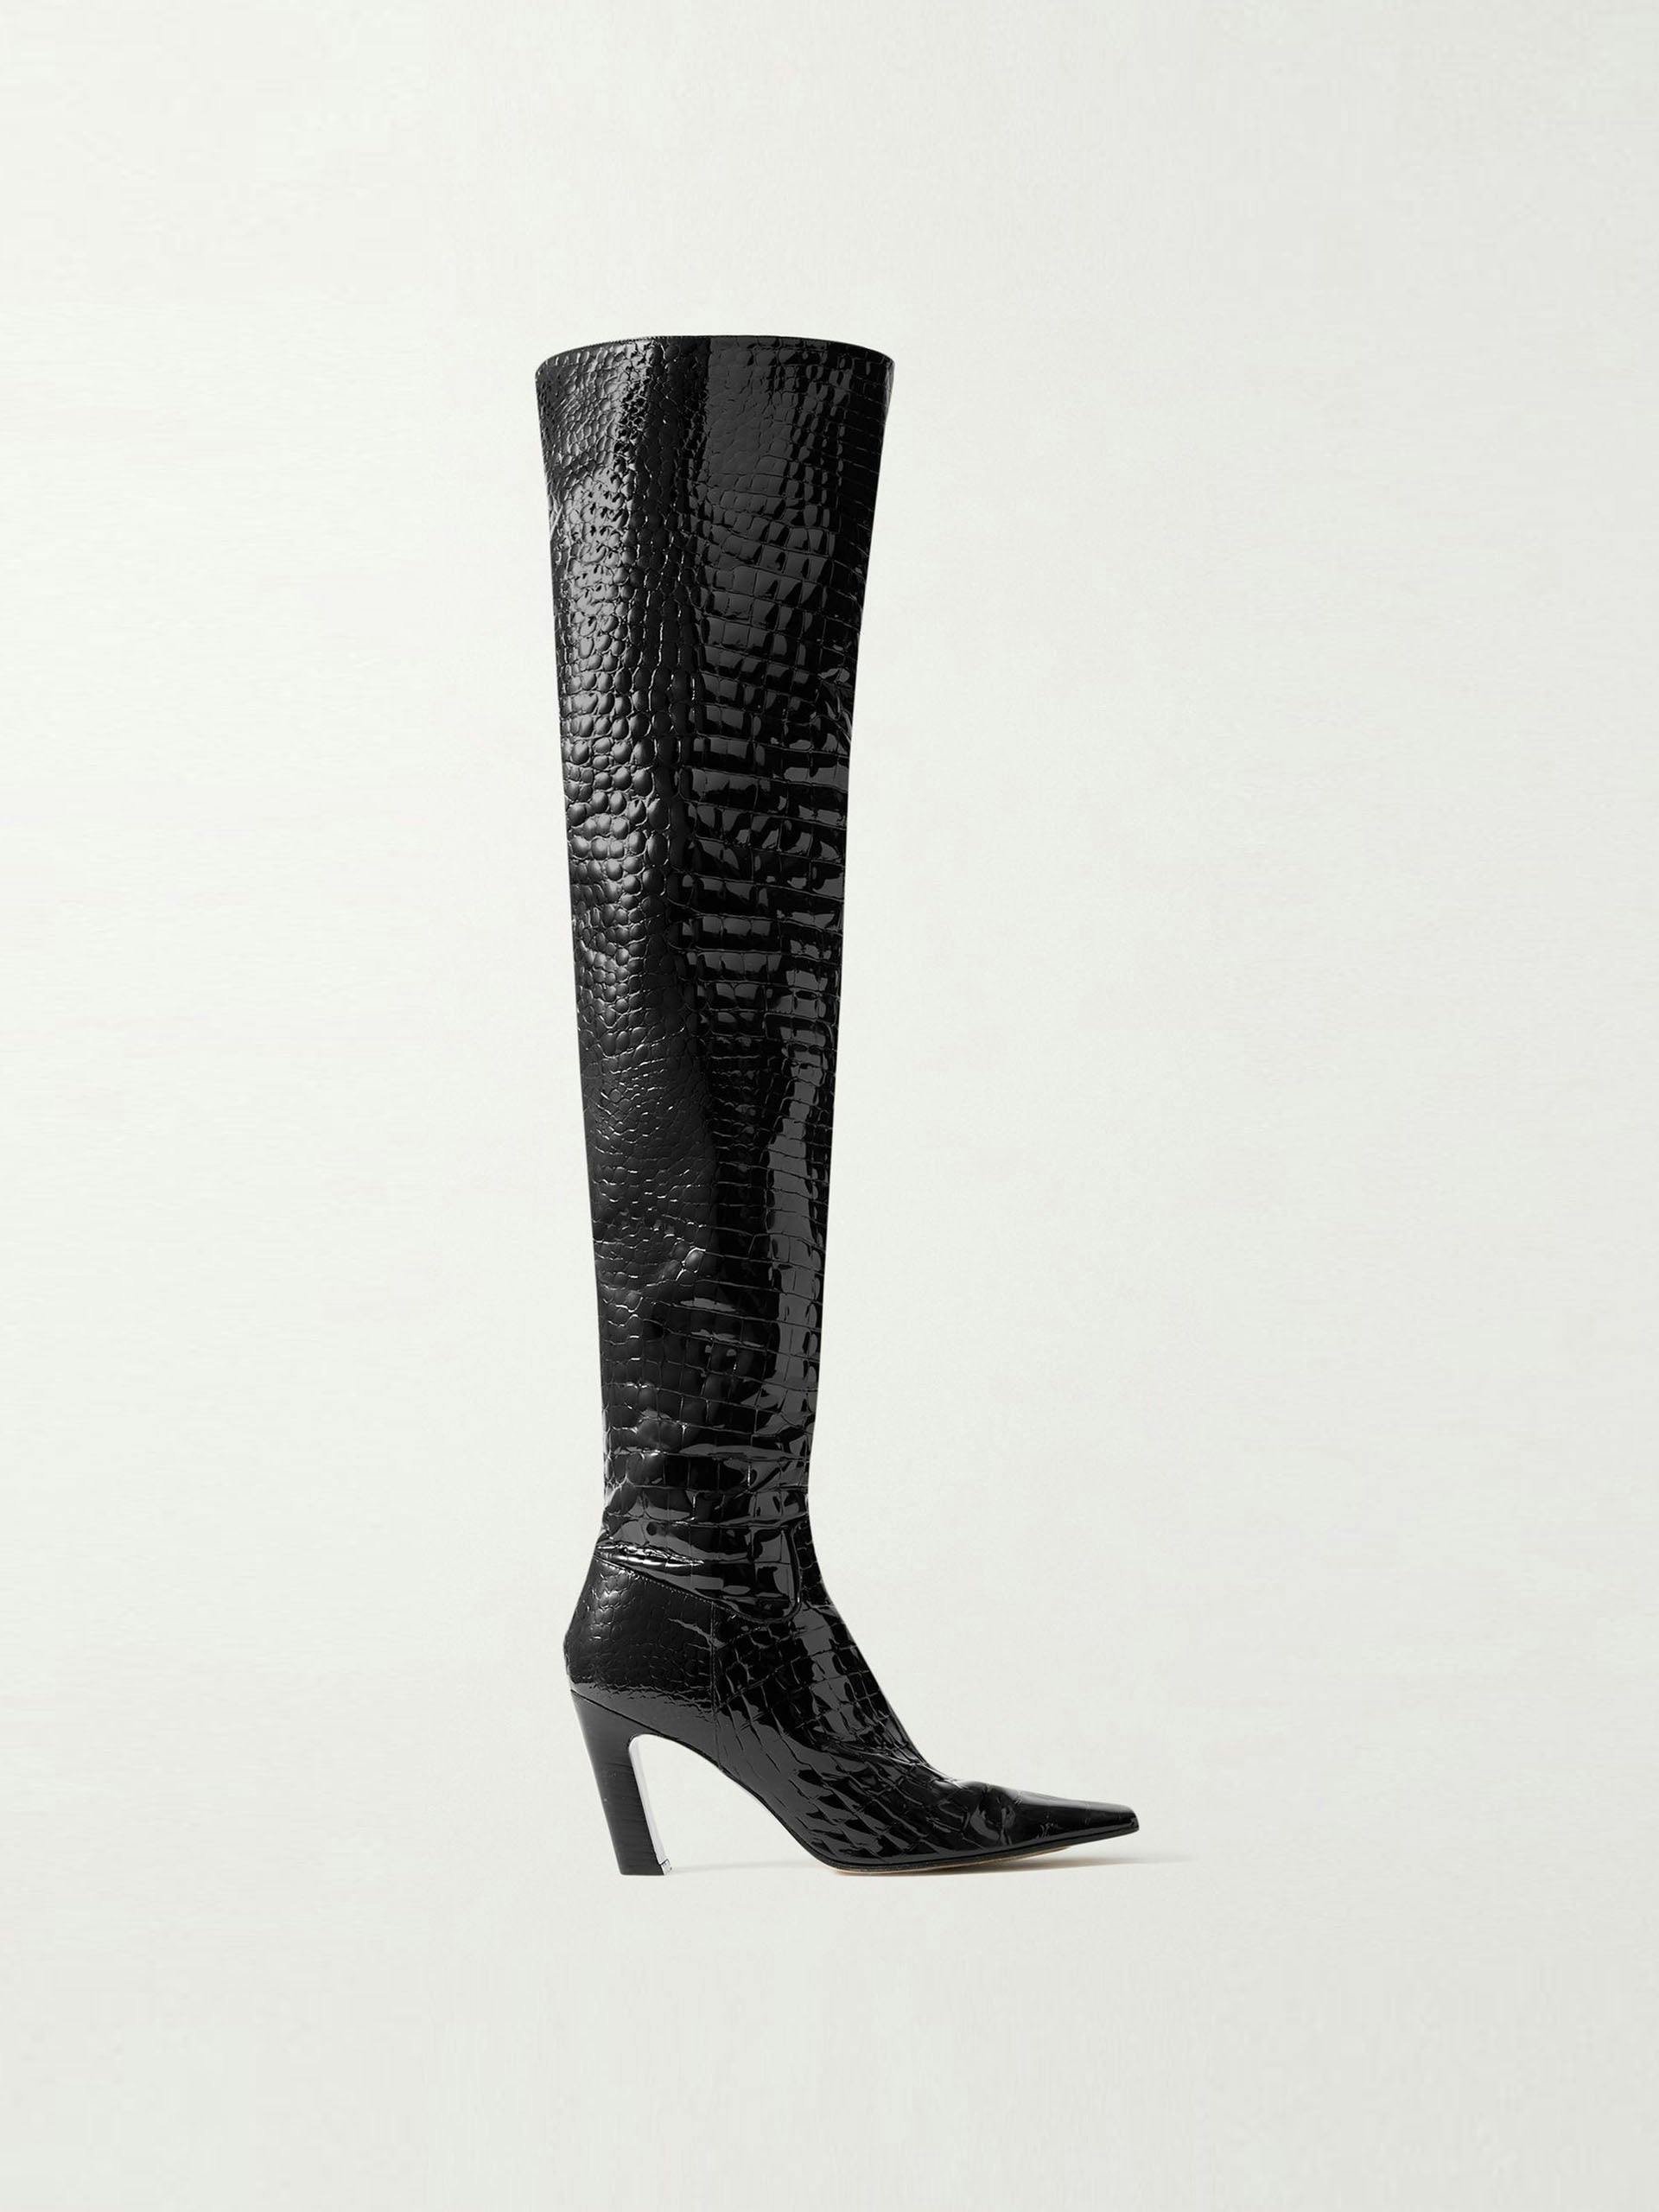 Black croc-effect leather over-the-knee boots